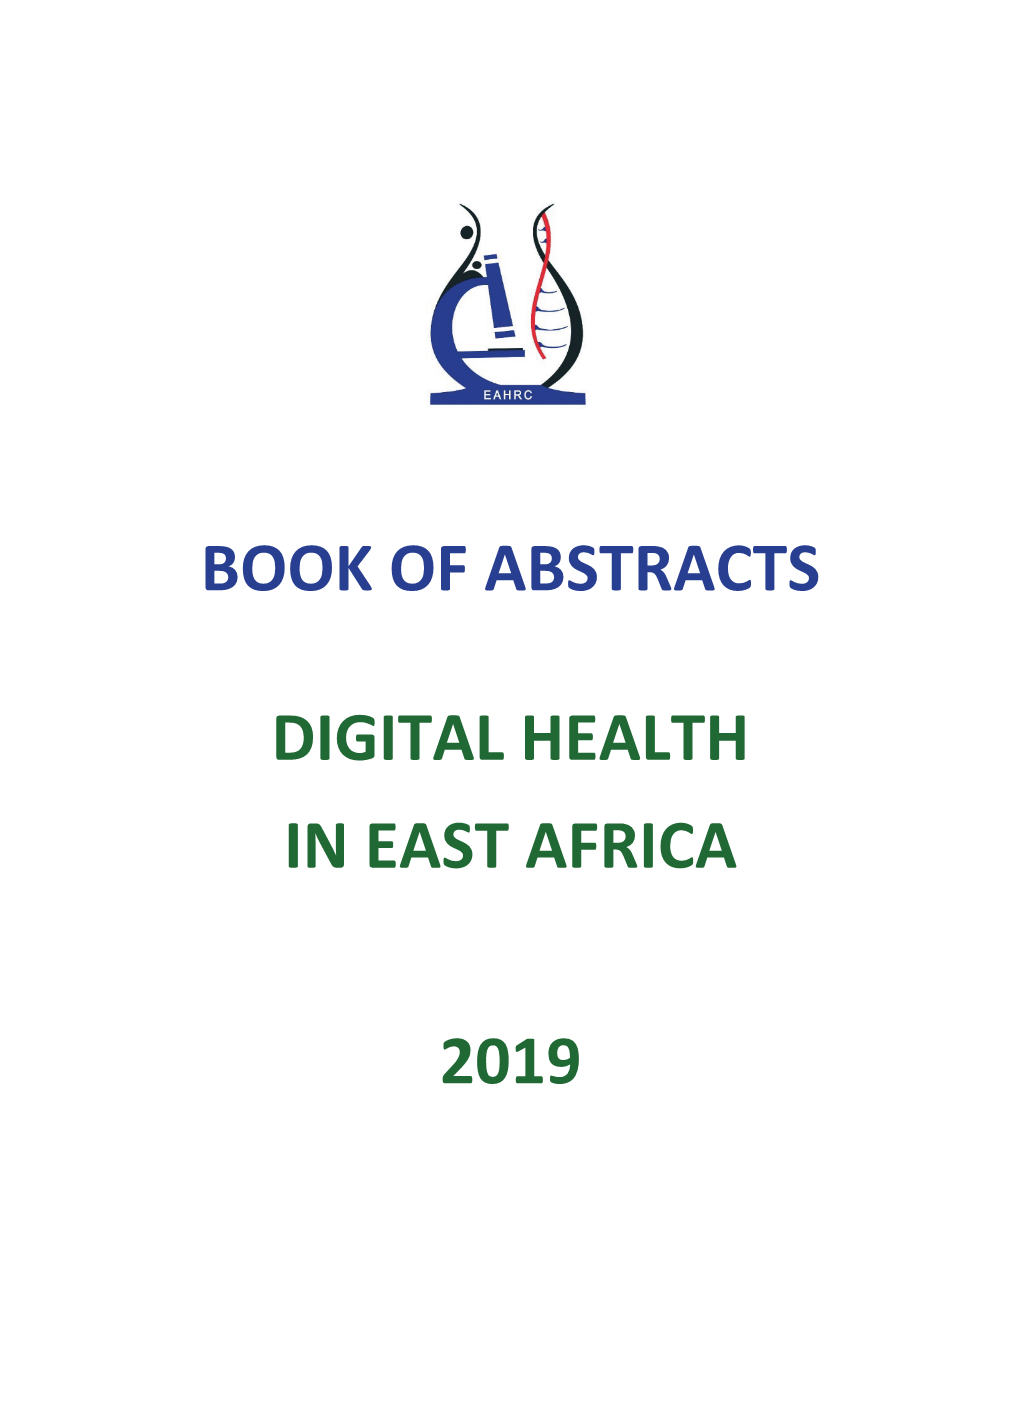 Book of Abstracts Digital Health in East Africa 2019